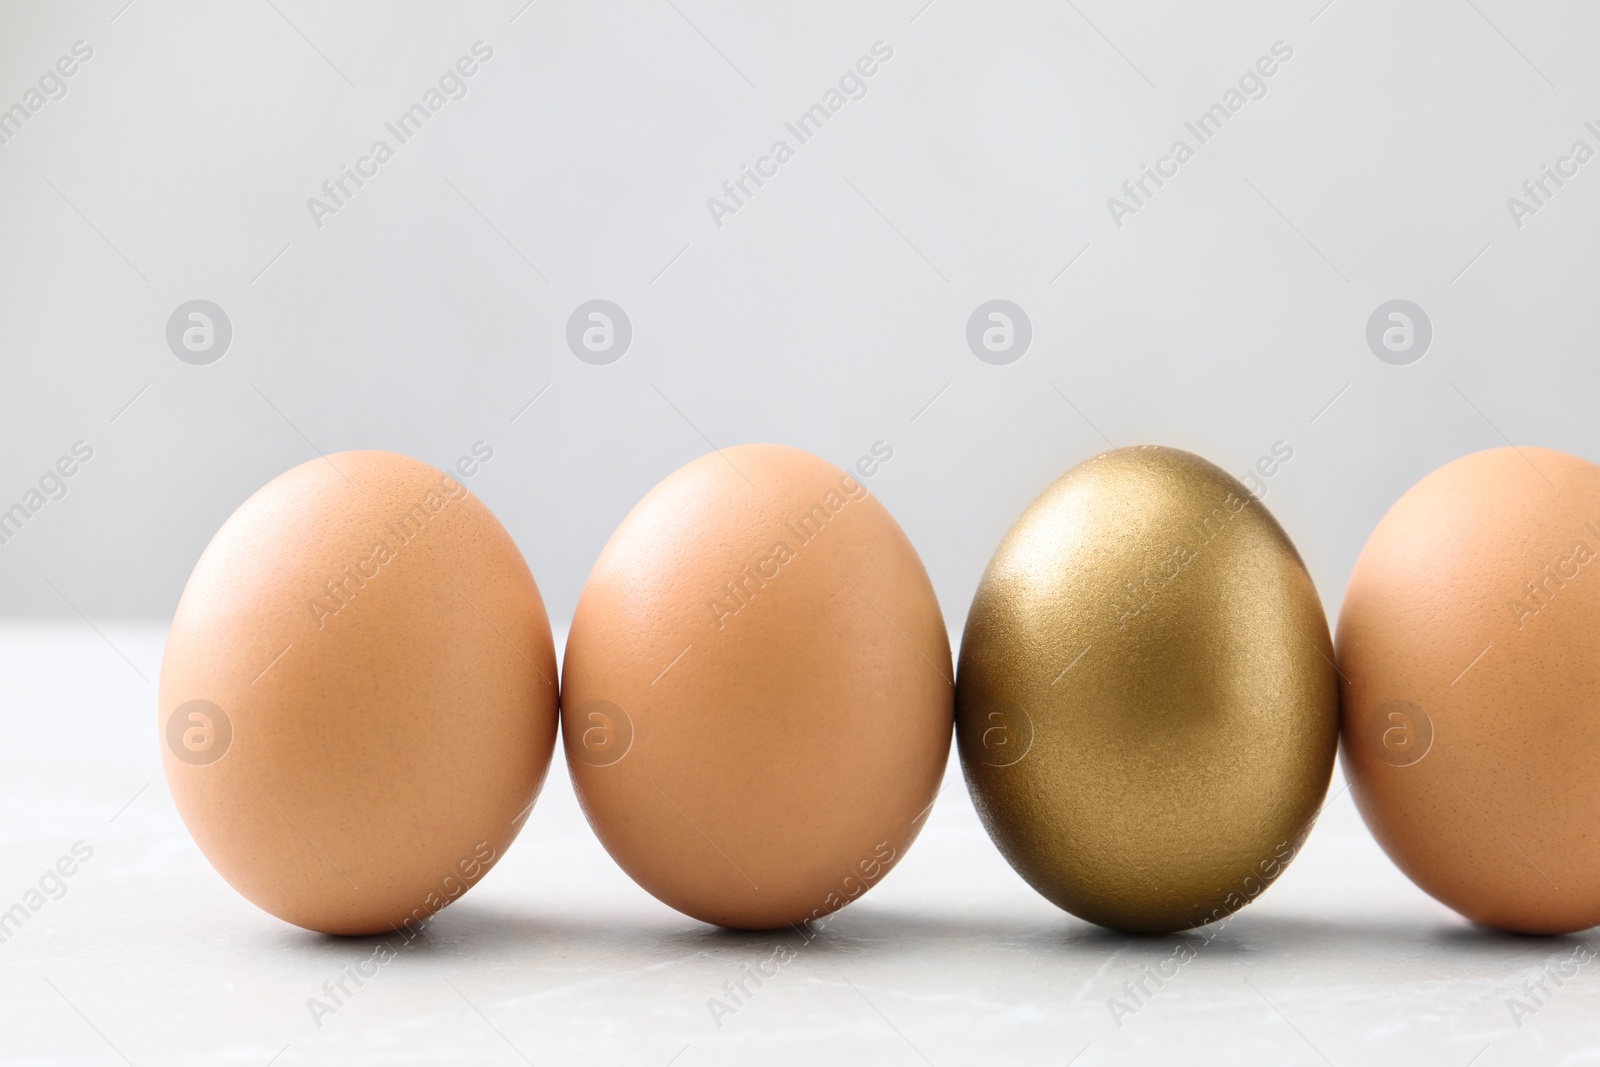 Photo of Golden egg among others on white table